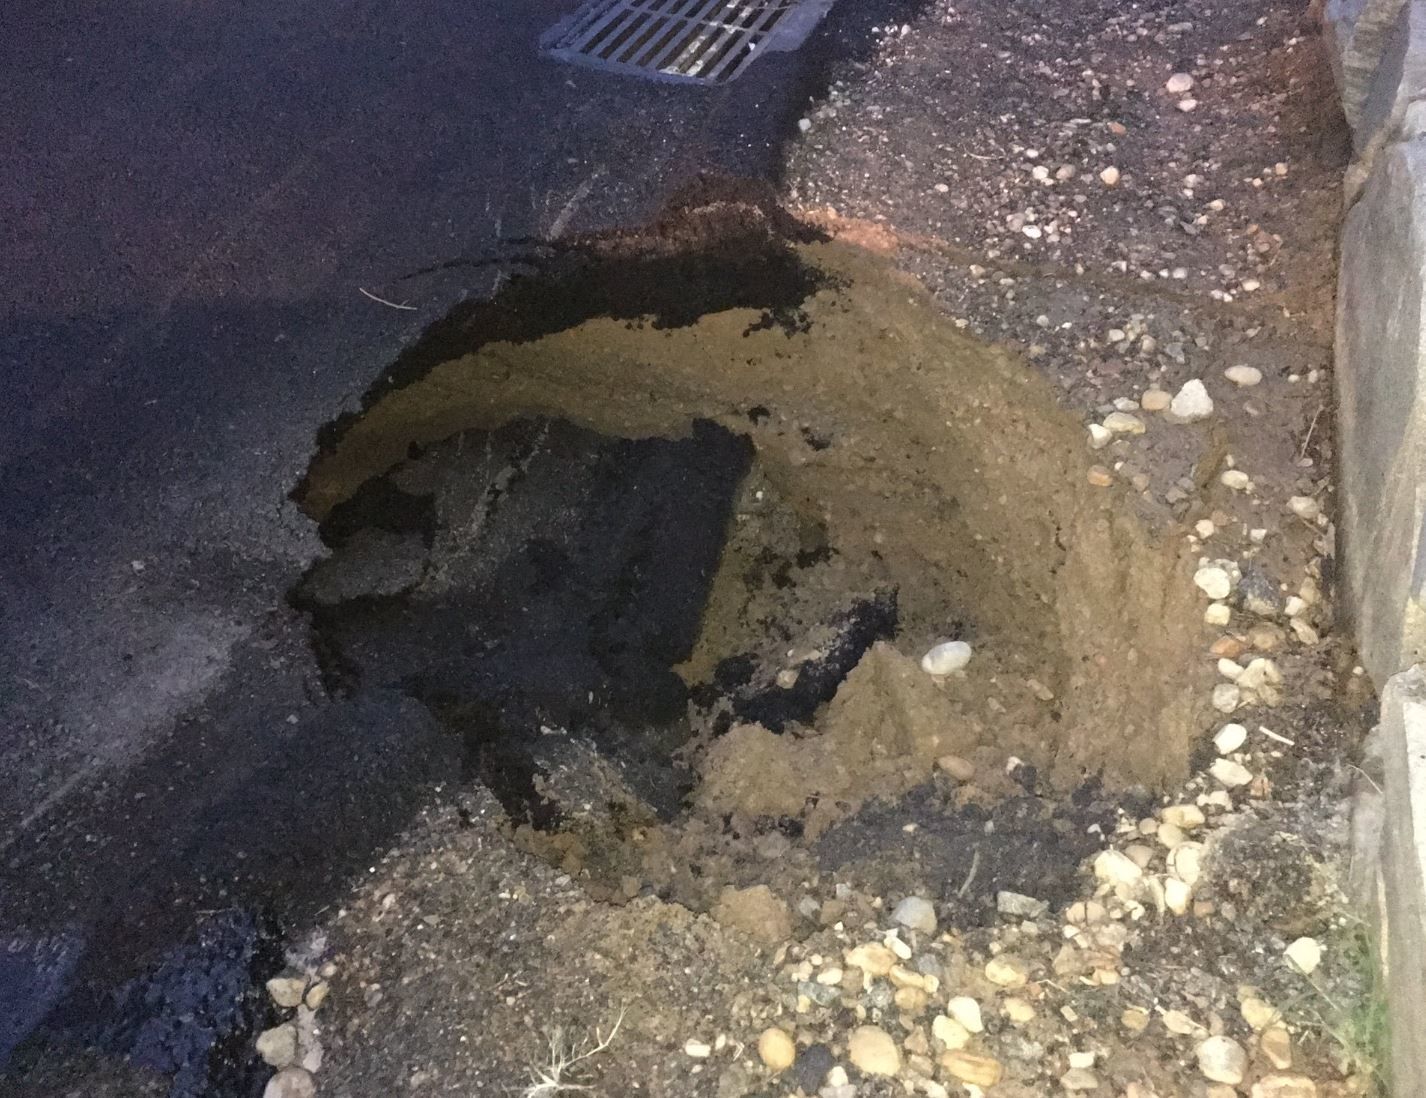 10 Foot Deep Sinkhole Closes Nb Gw Parkway For Next Several